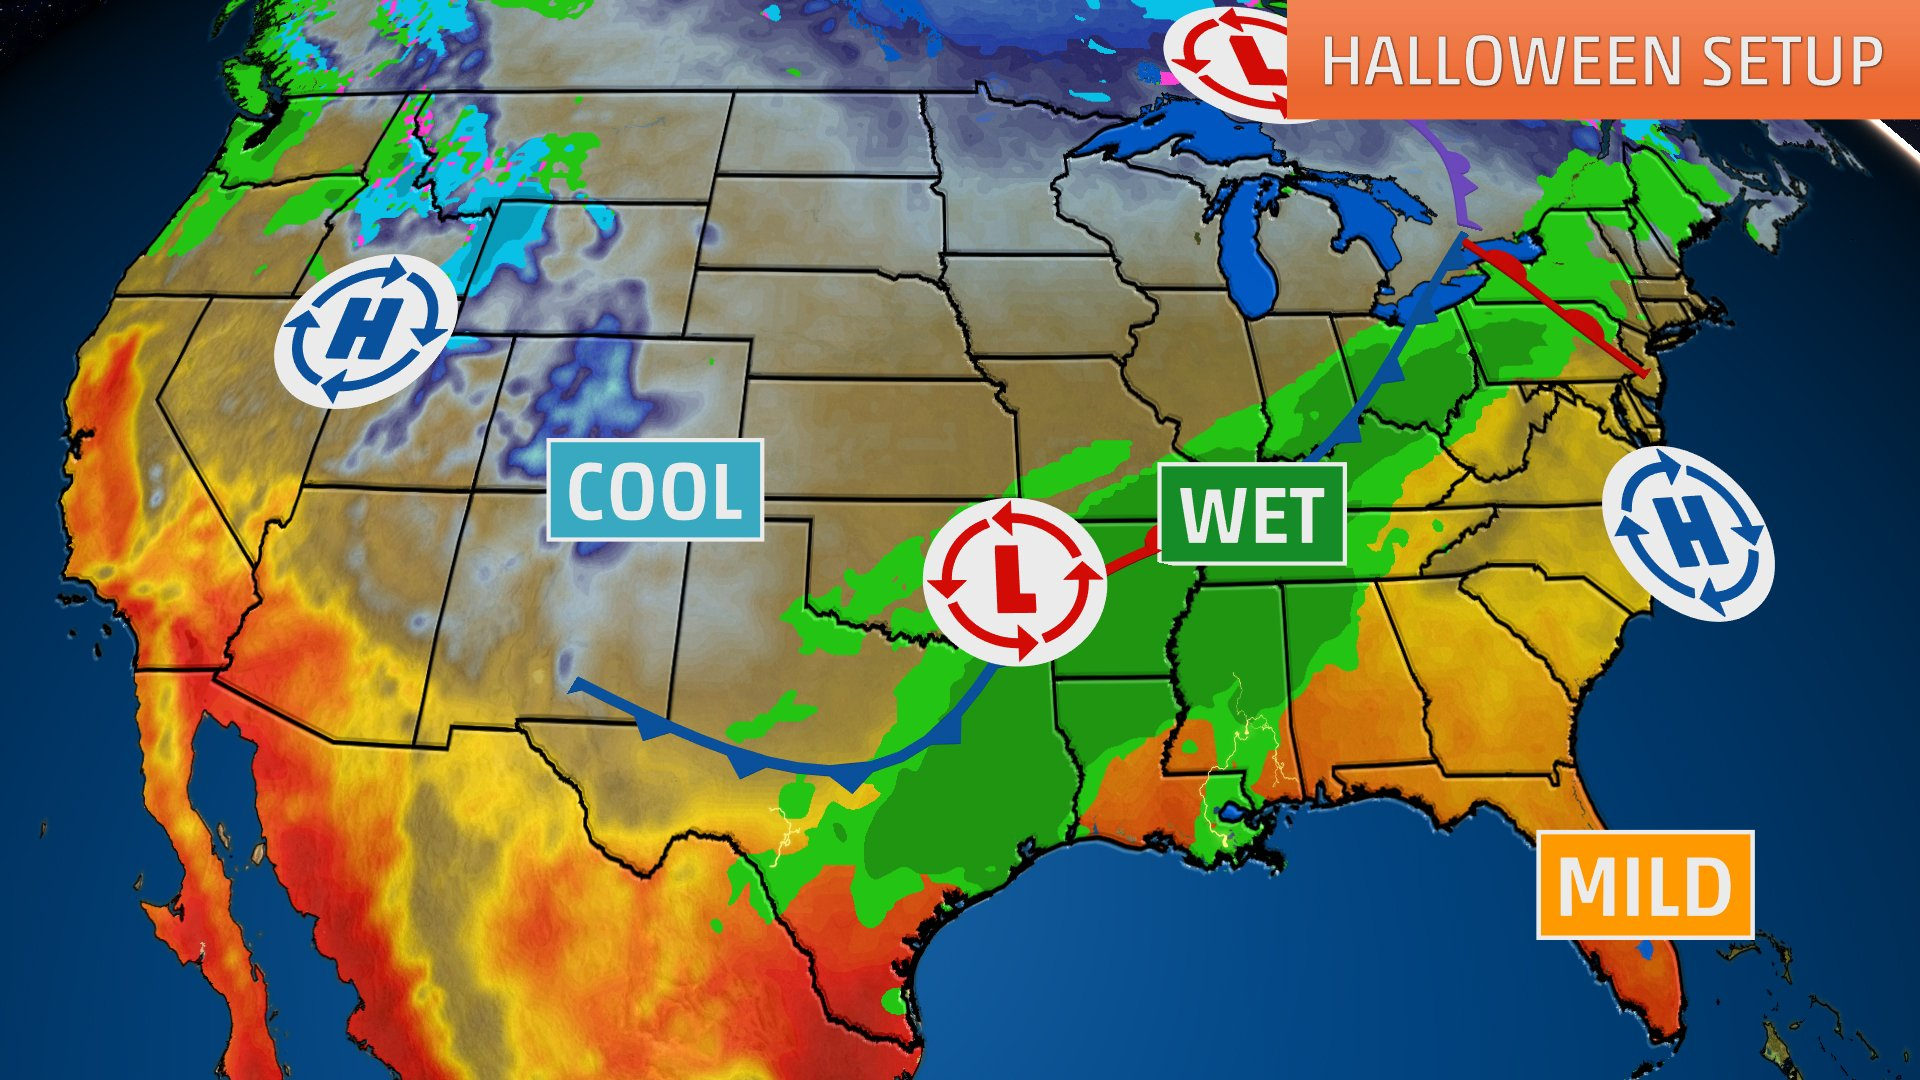 Halloween Weather Forecast: Wet Conditions From Texas To Ohio Valley - North Texas Radar Map